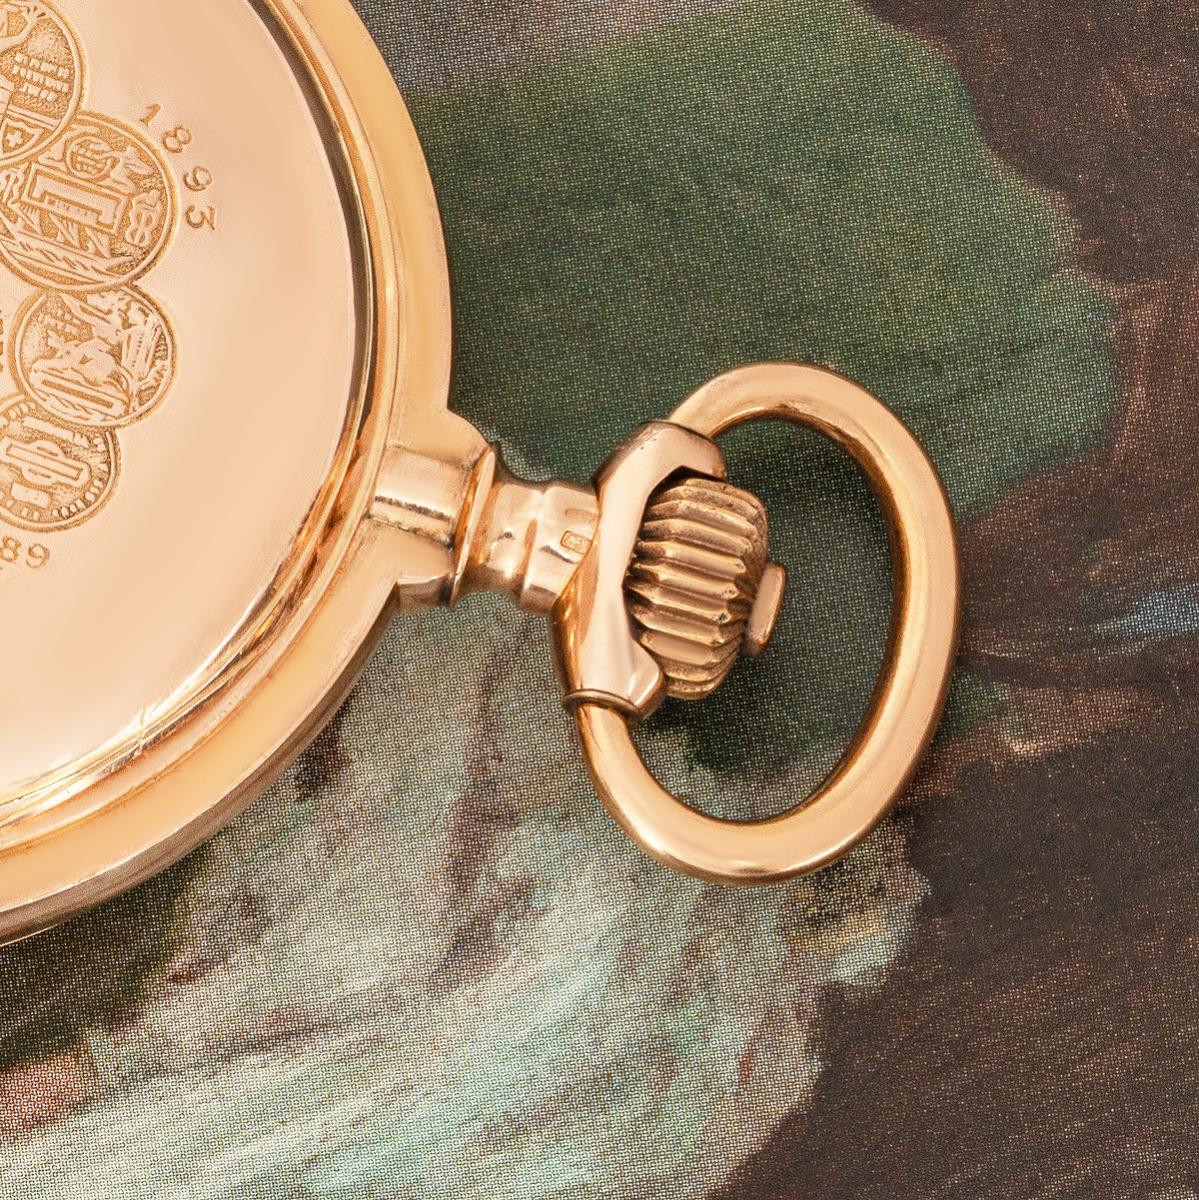 Vulcain. An 18ct Rose Gold Minute Repeater Calendar Chronograph Keyless Lever Full Hunter Pocket Watch C1890s.

Dial: The white enamel dial with Roman numerals outer minute track, the subsidiary date dial located at twelve o'clock. The phases of the